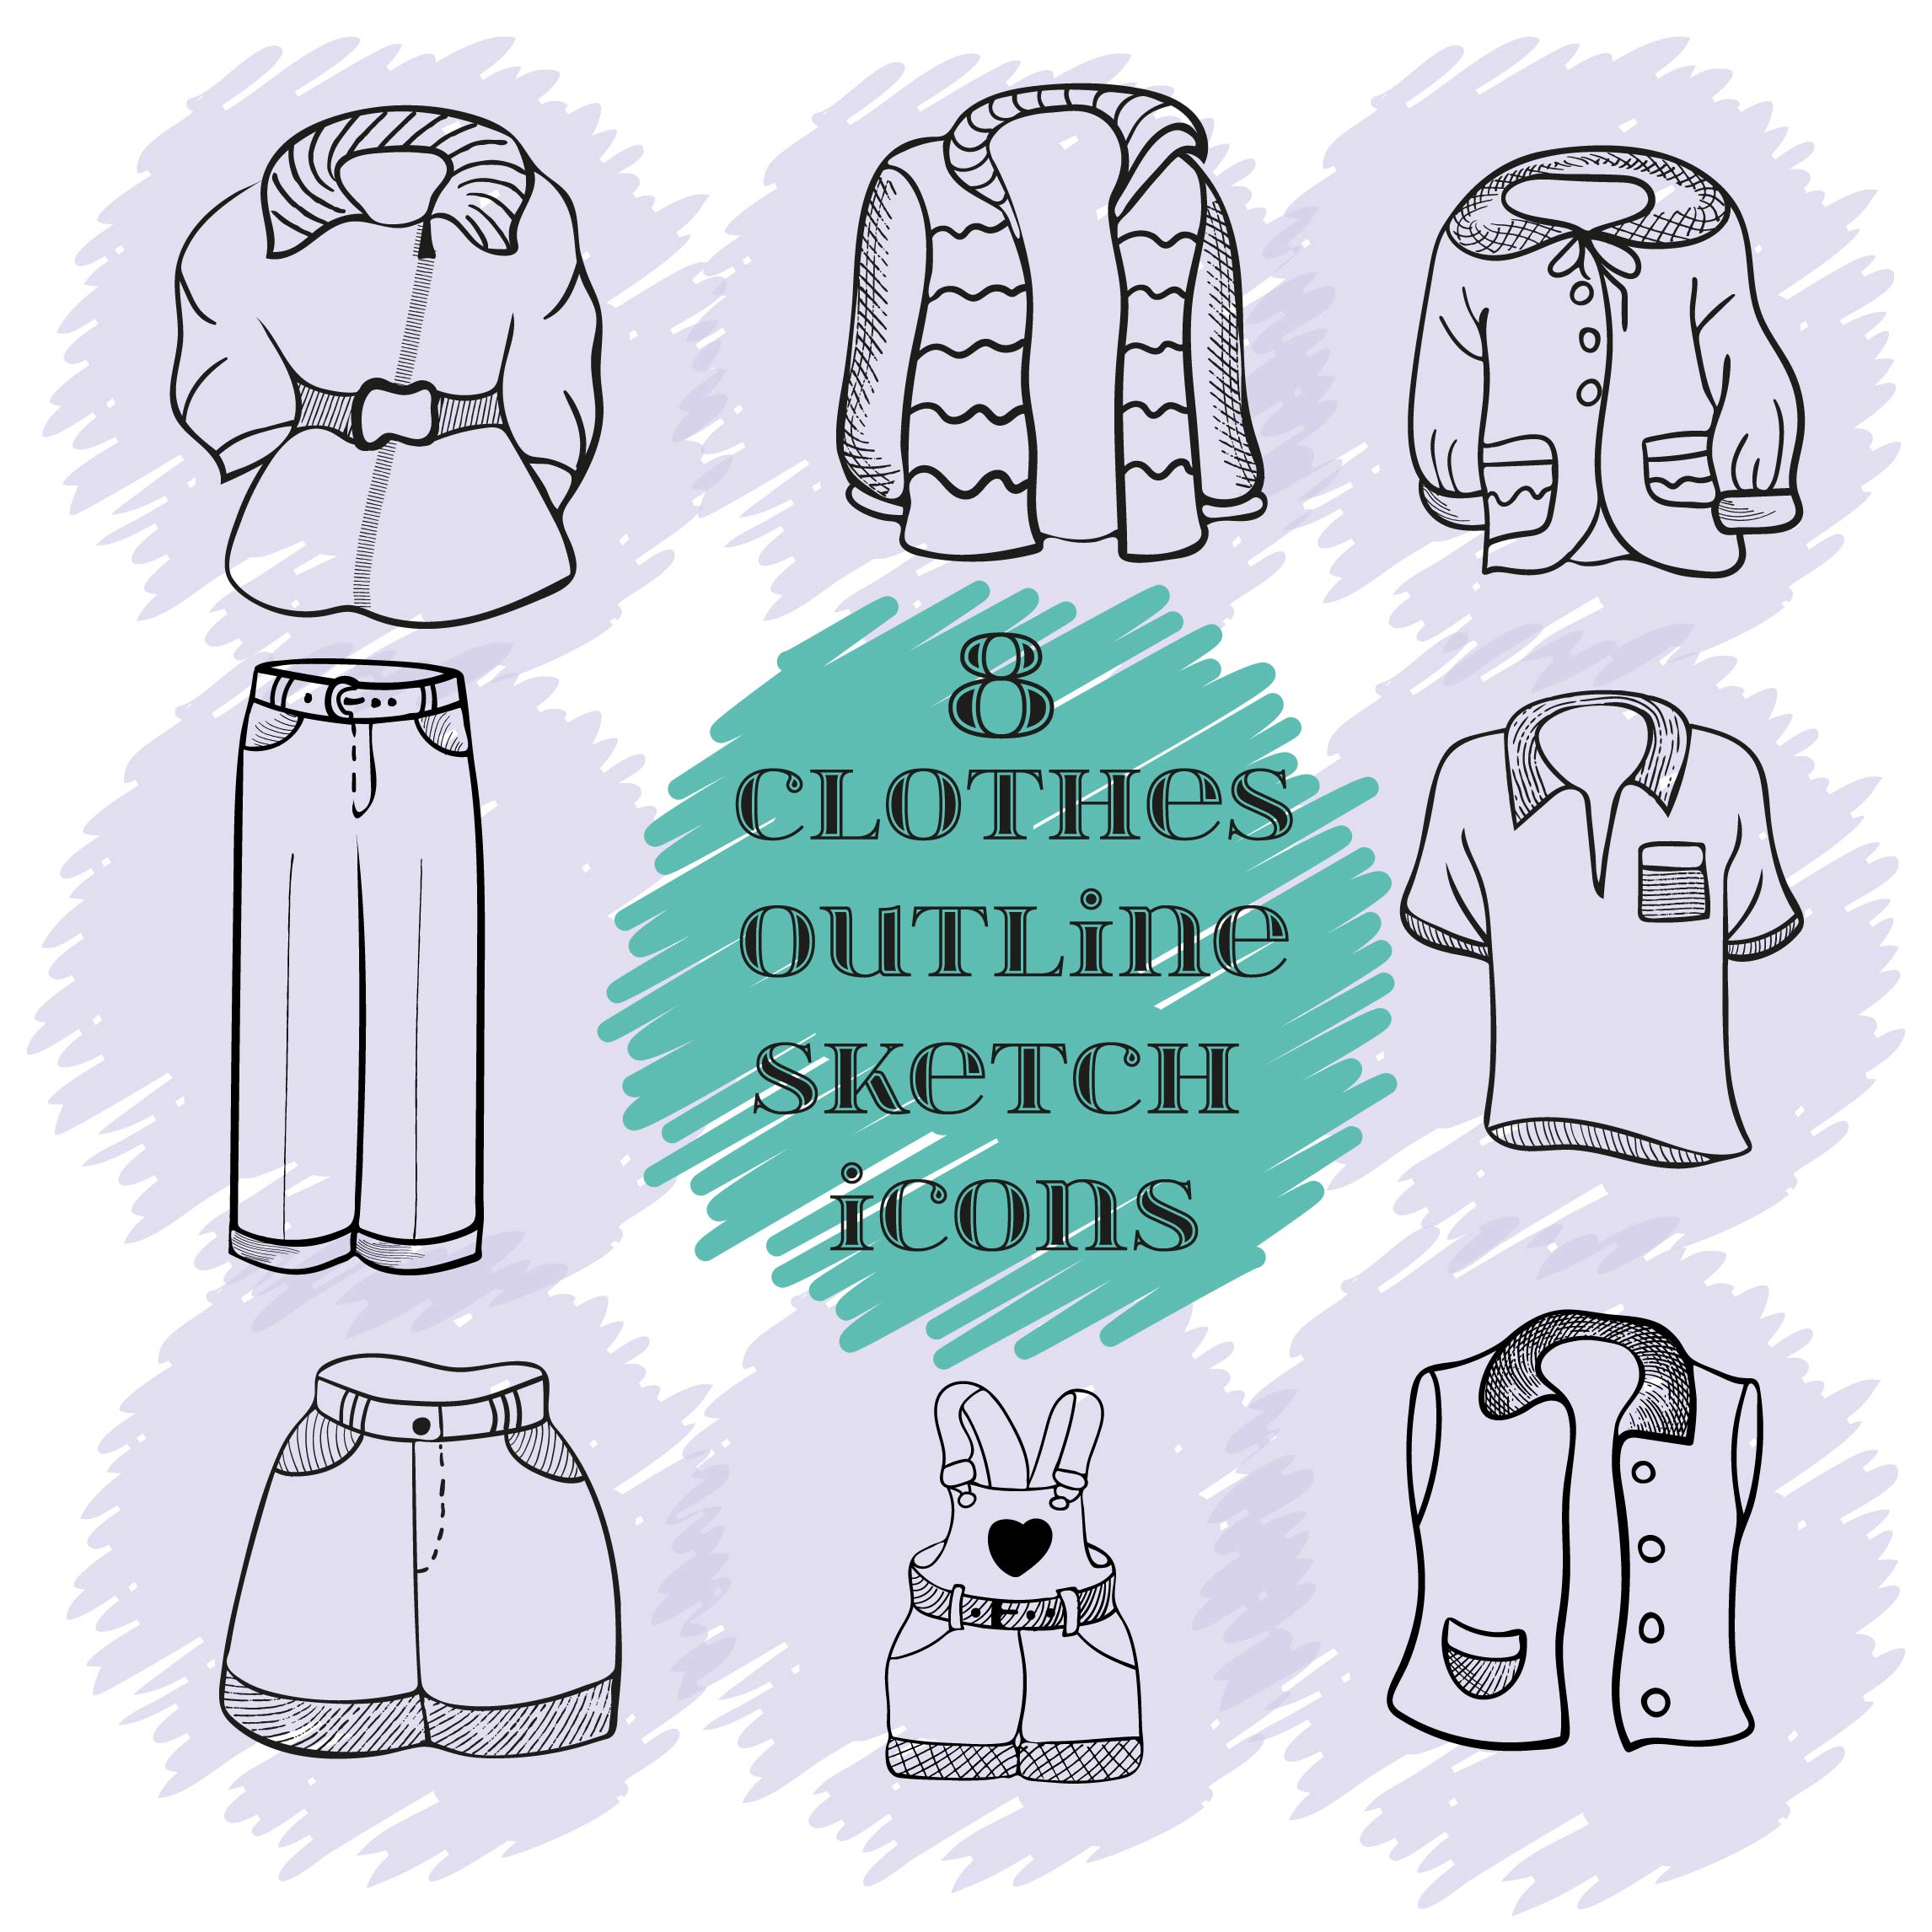 Clothes outline sketch icons cover image.